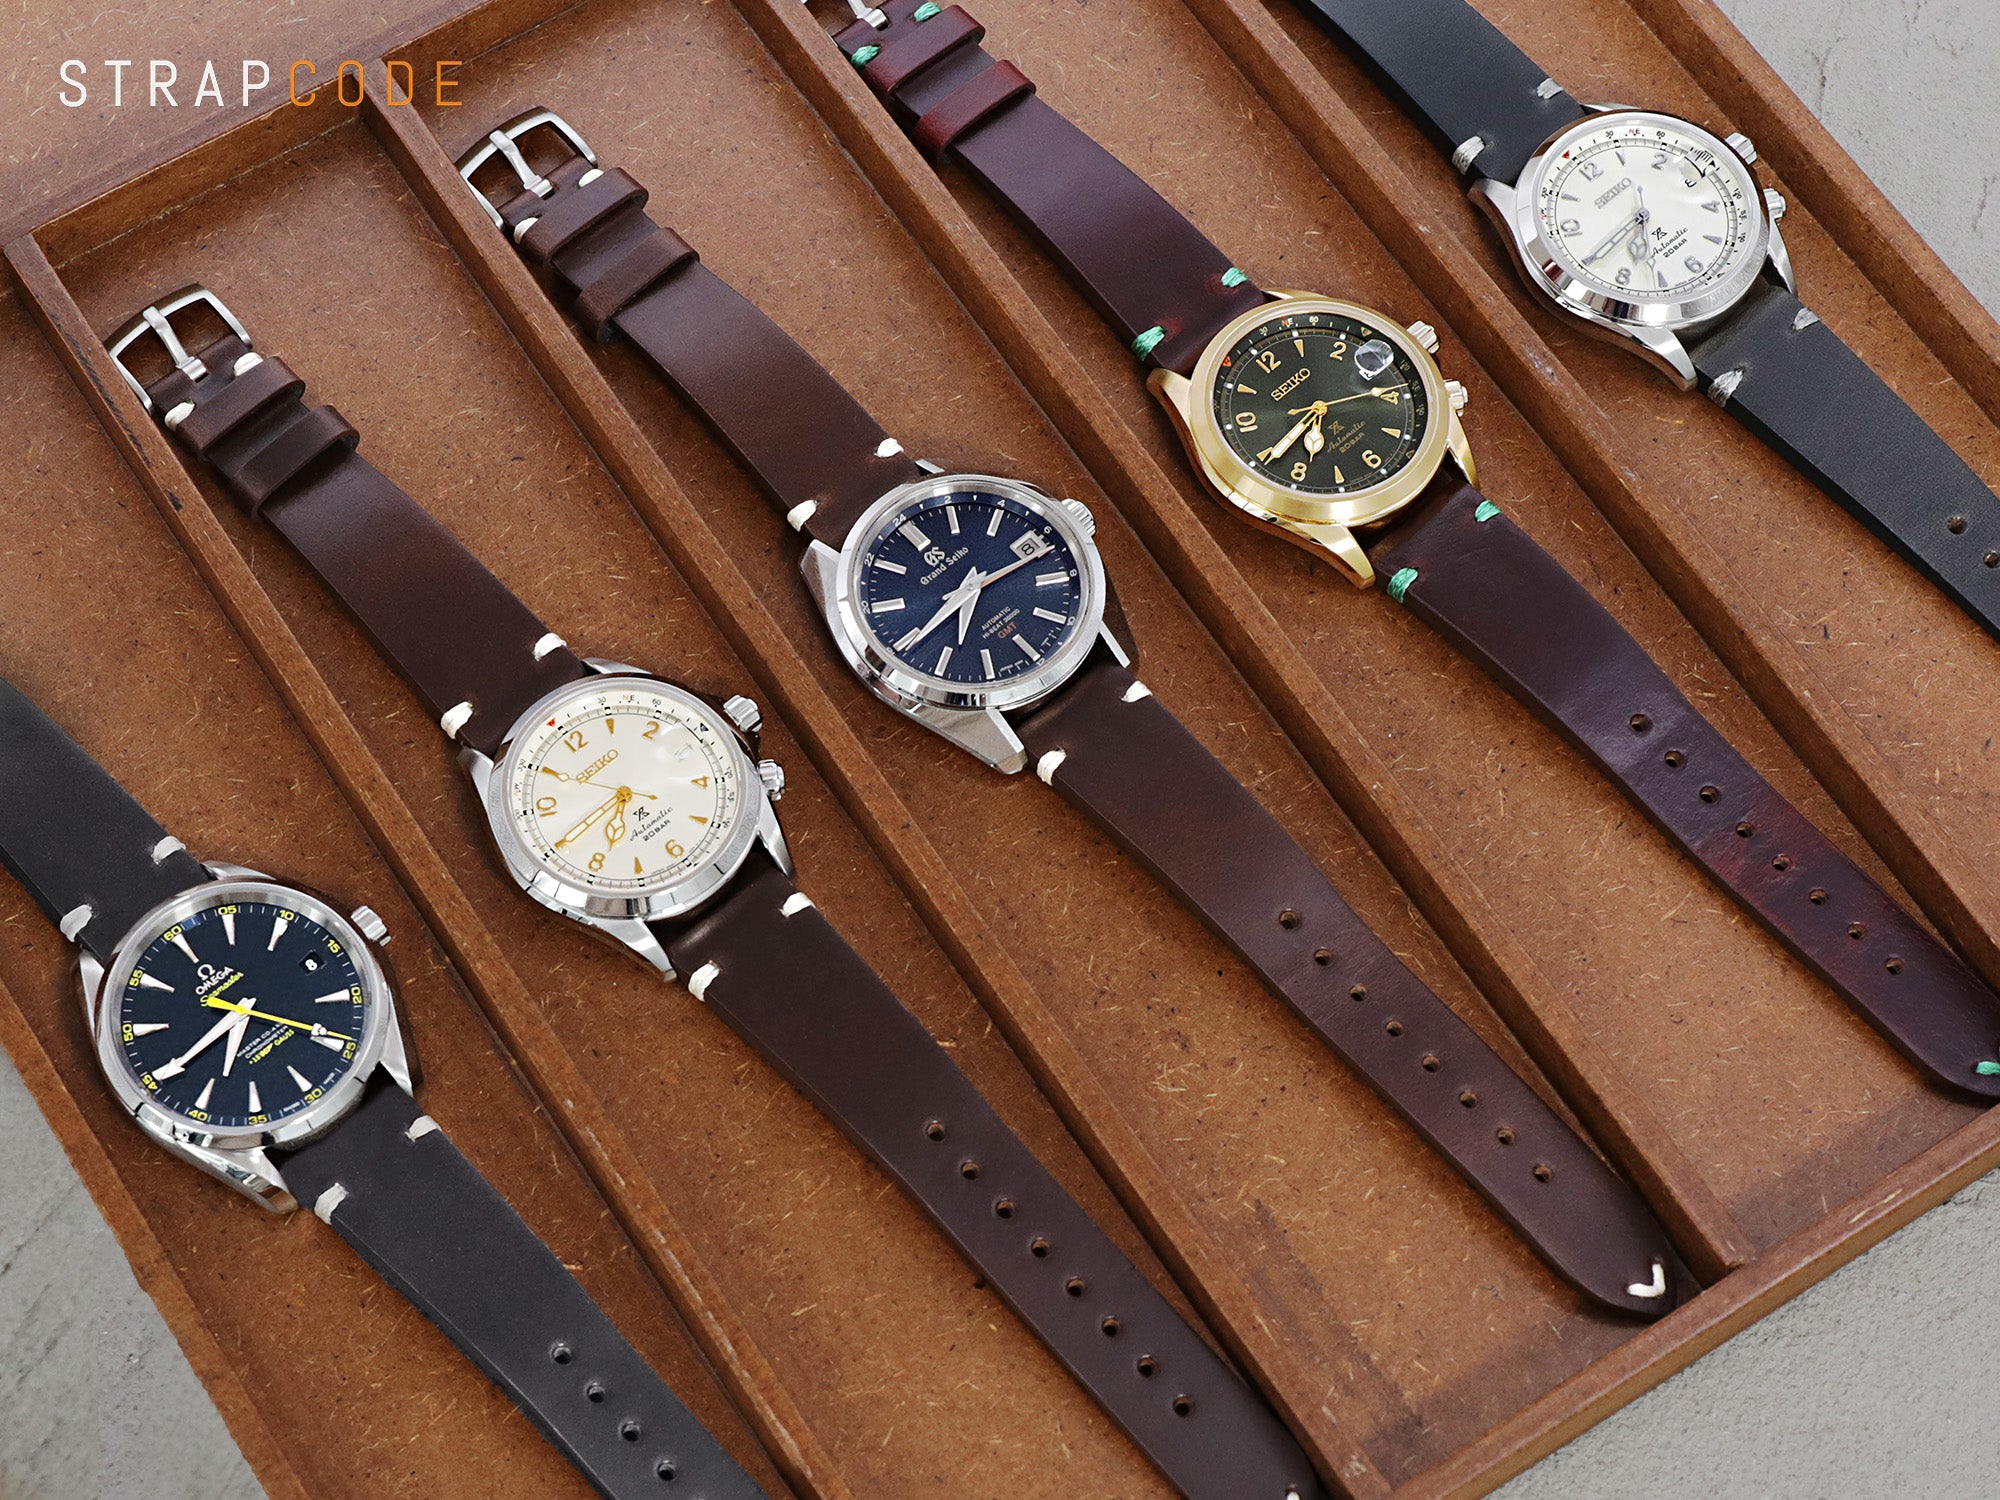 A collection of Horween Chromexcel leather straps by Strapcode